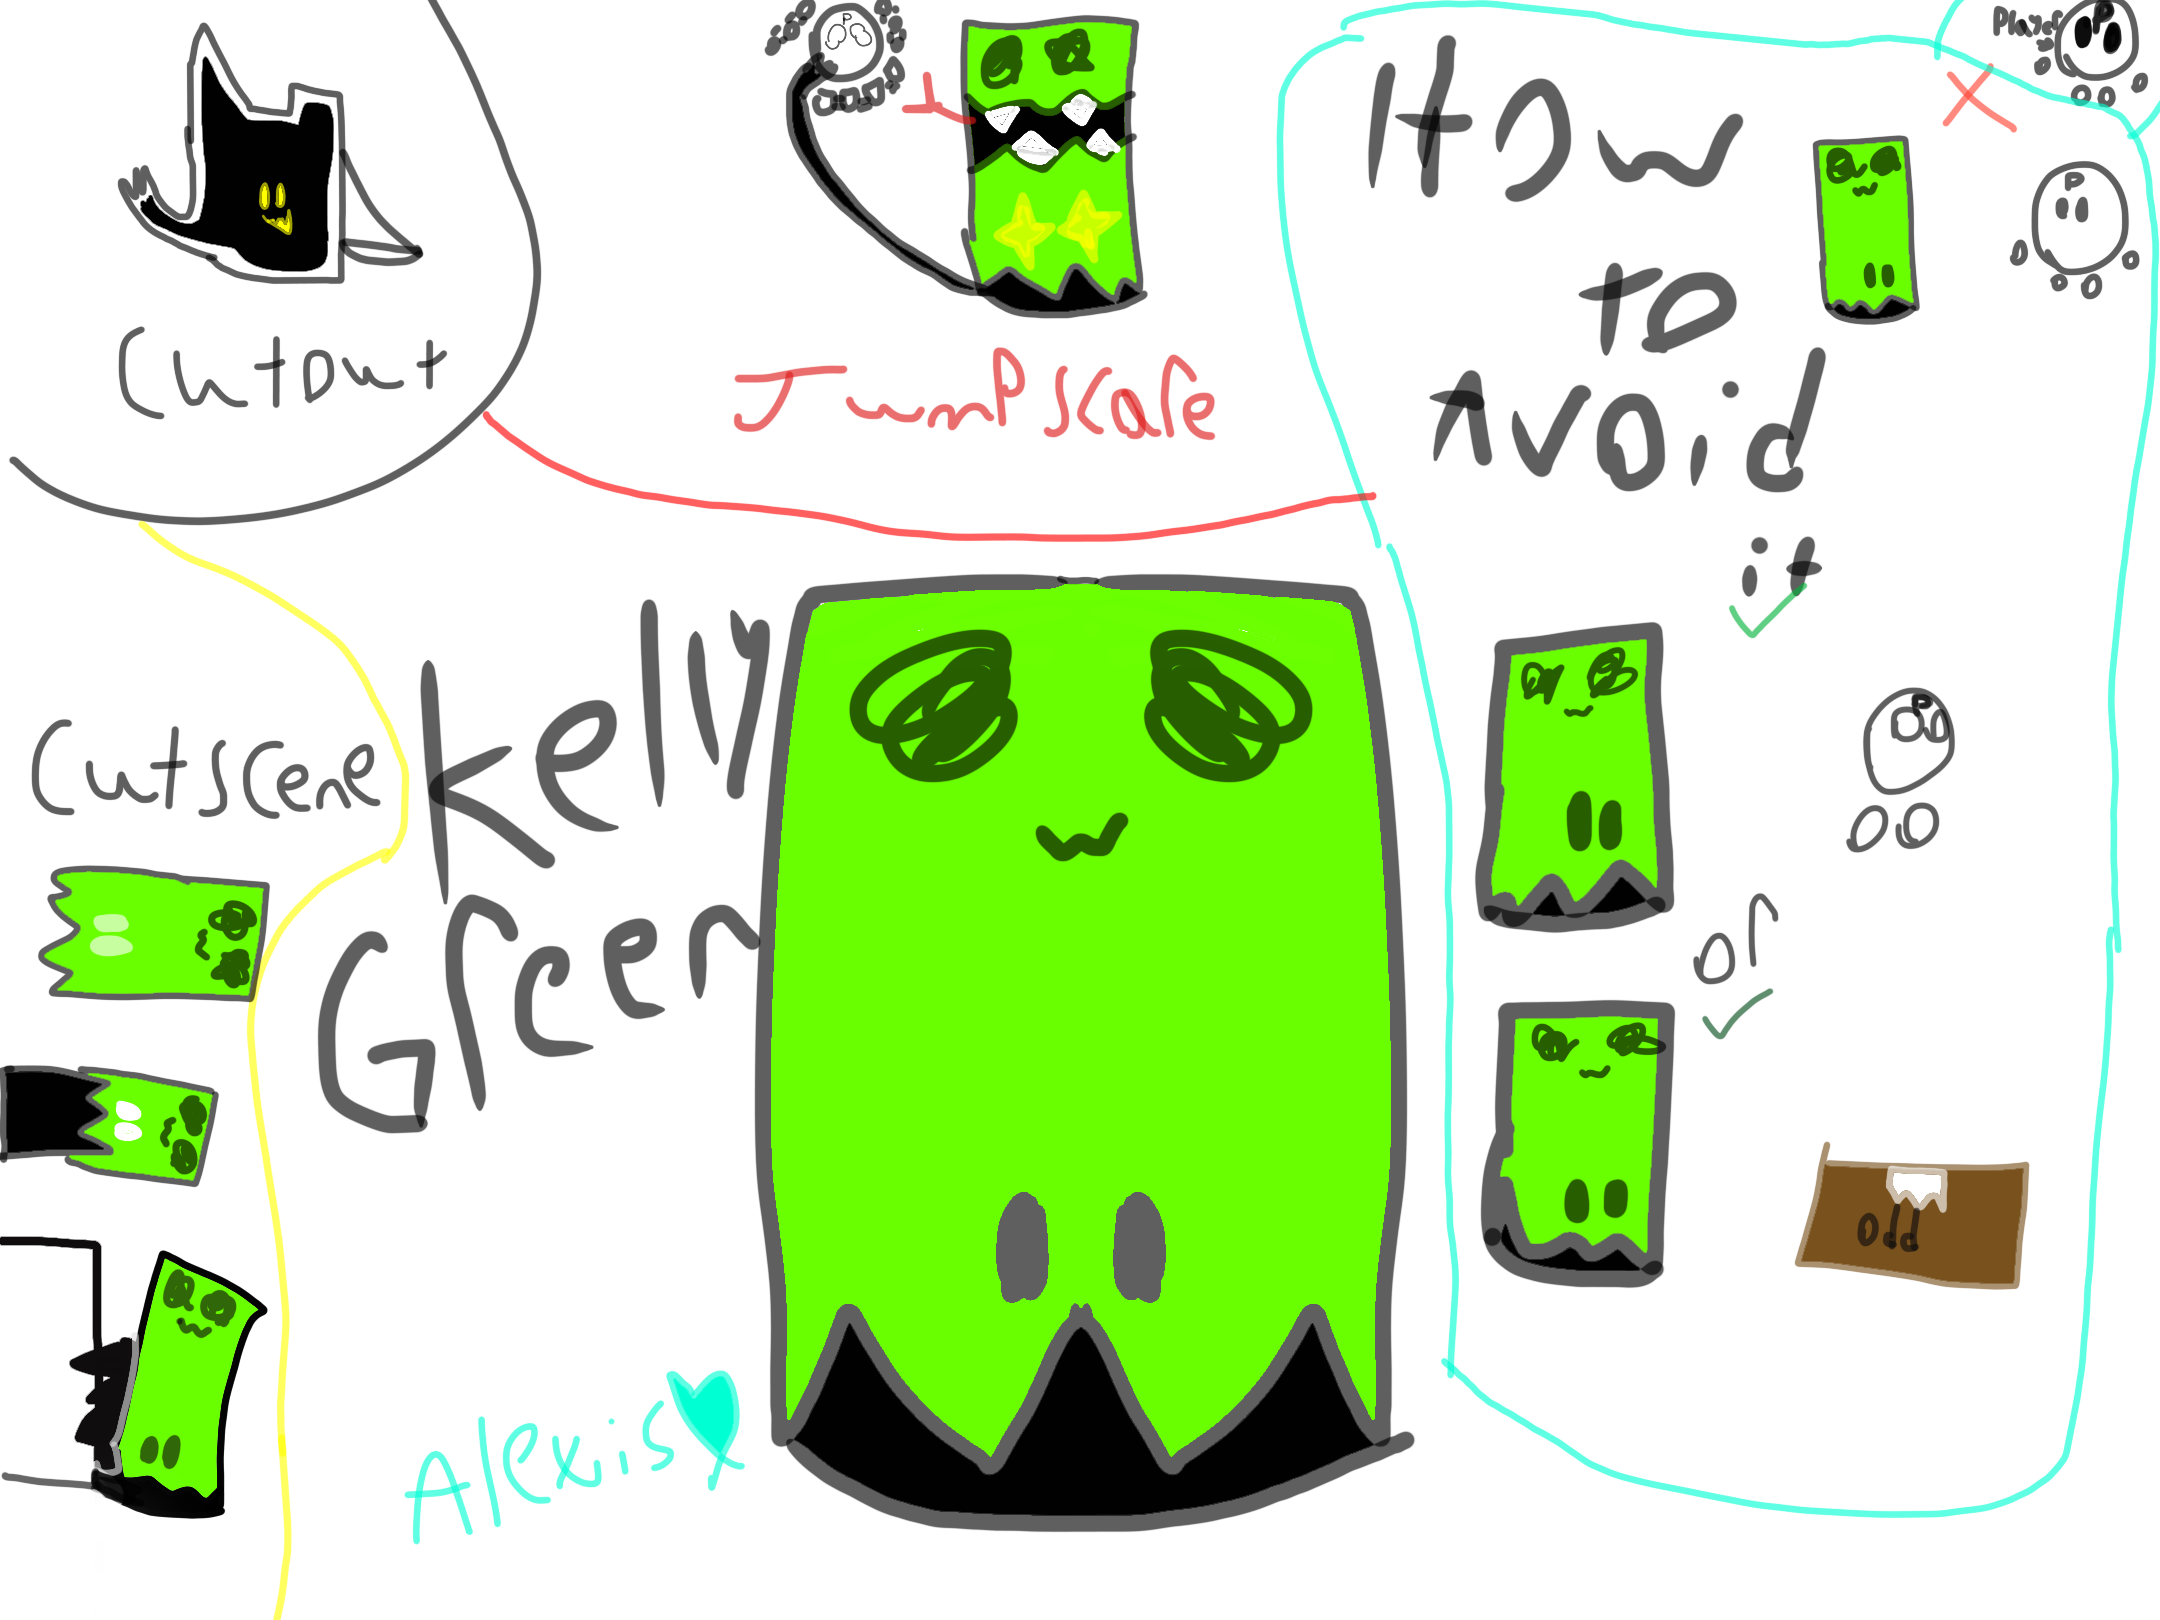 Rainbow friends concept Kelly green by Alexis967 on DeviantArt